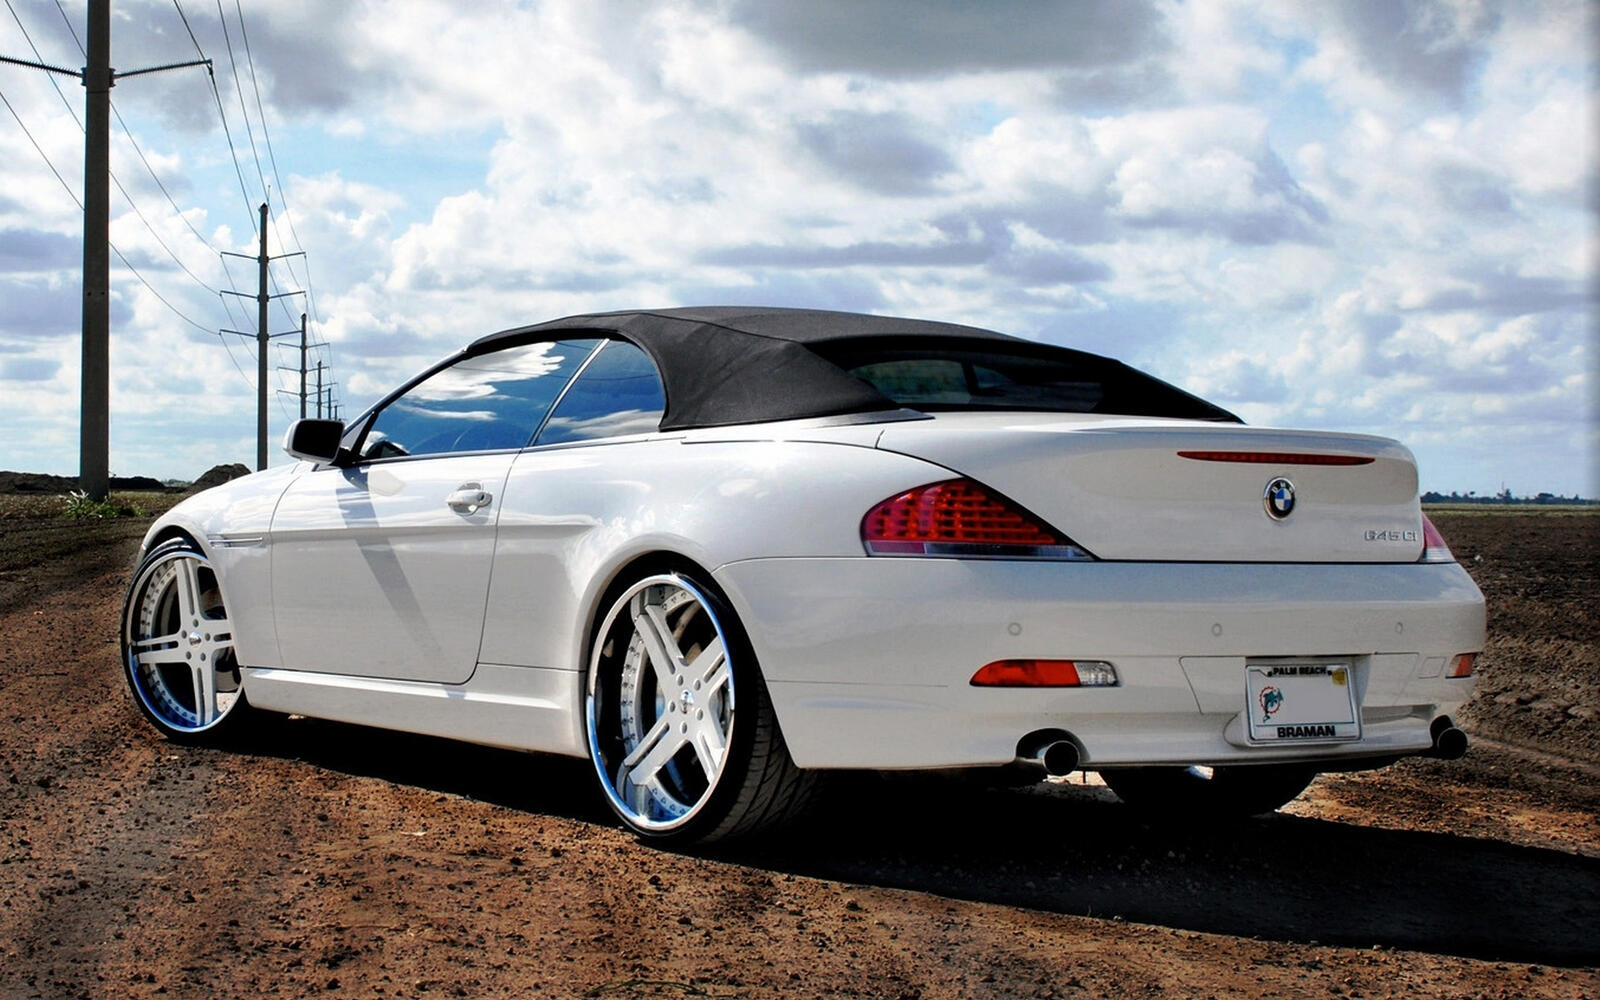 Wallpapers roof white cabriolet on the desktop